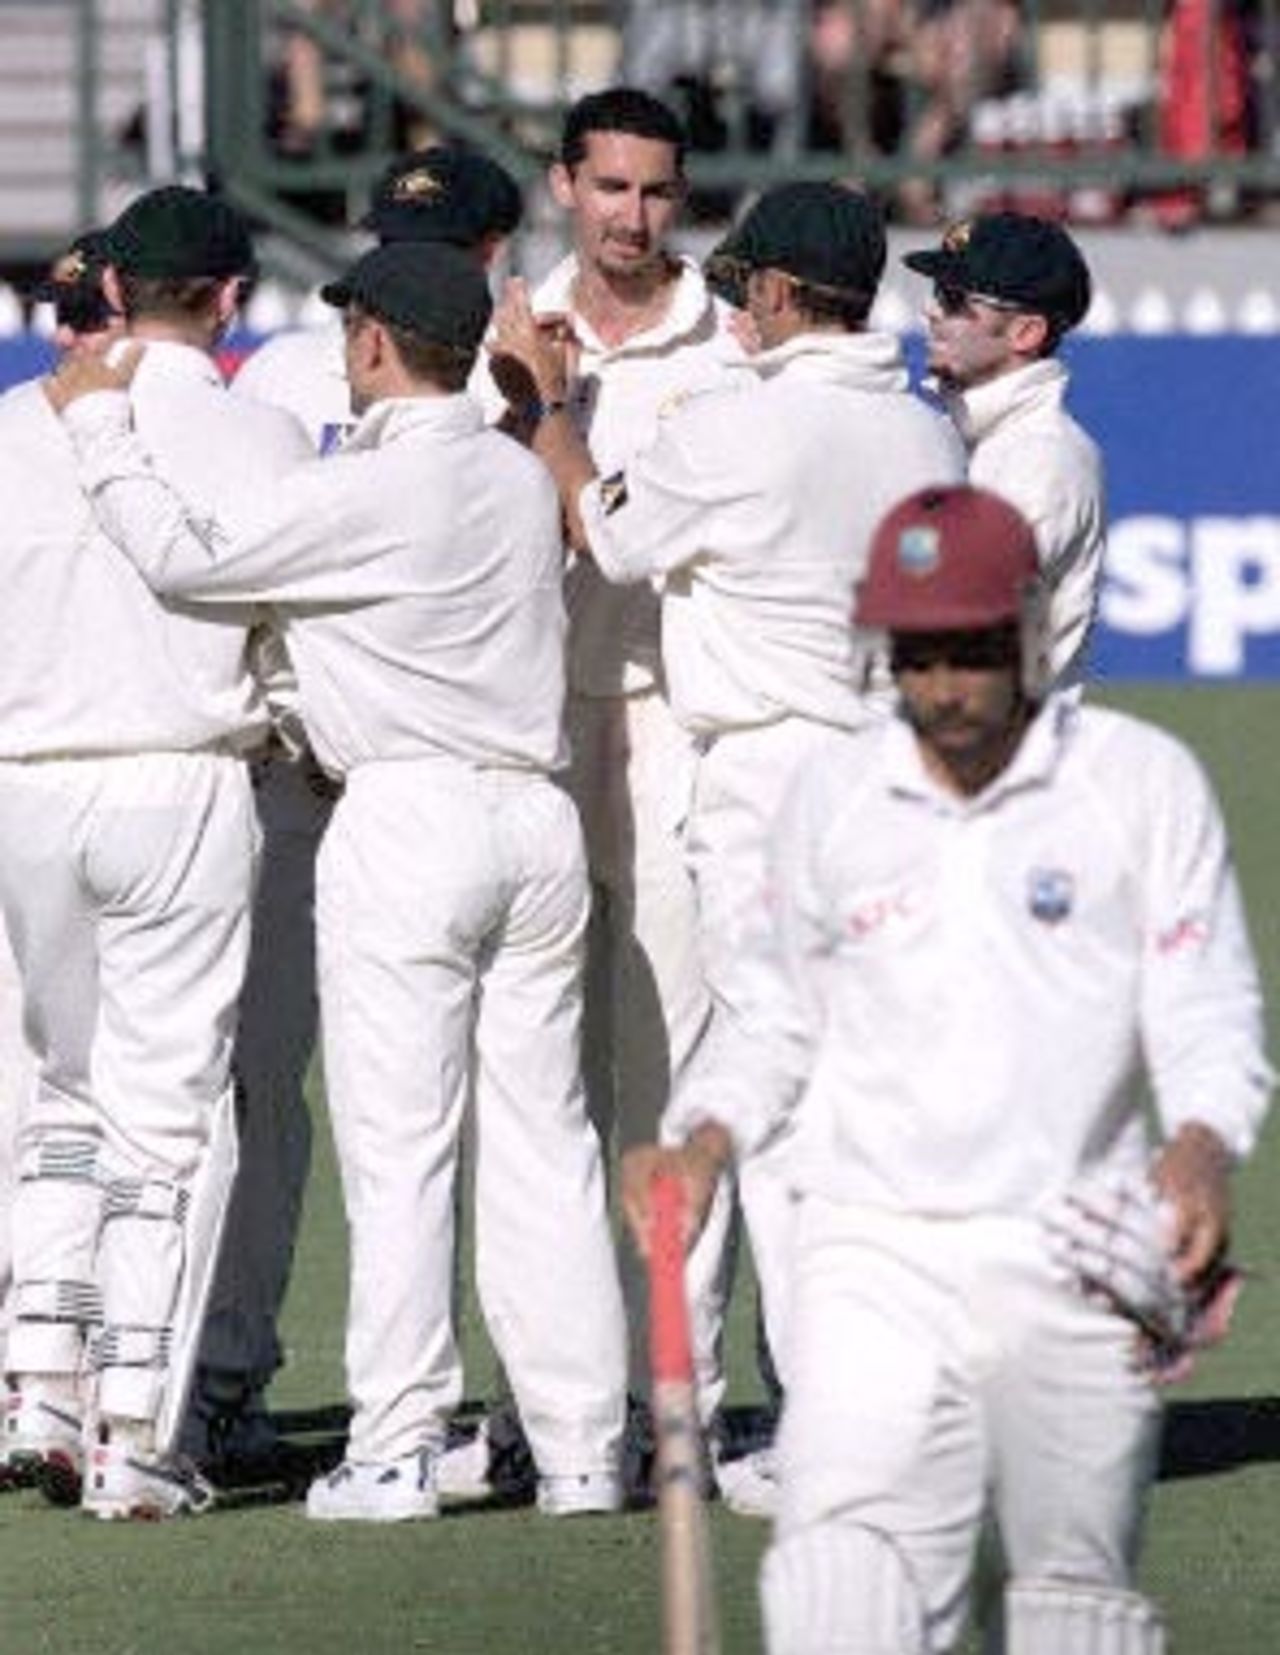 Australian fast bowler Jason Gillespie (3rd R, at back) is congratulated by teammates after taking the wicket of West Indies captain Jimmy Adams (leaving field) for 49 runs on the first day of the third test against the West Indies at the Adelaide oval 15 December 2000. Gillespie took all four wickets to fall, with the West Indies finishing the day on 4 for 274 runs, with Lara not out on 136 and Dillon not out on 3.